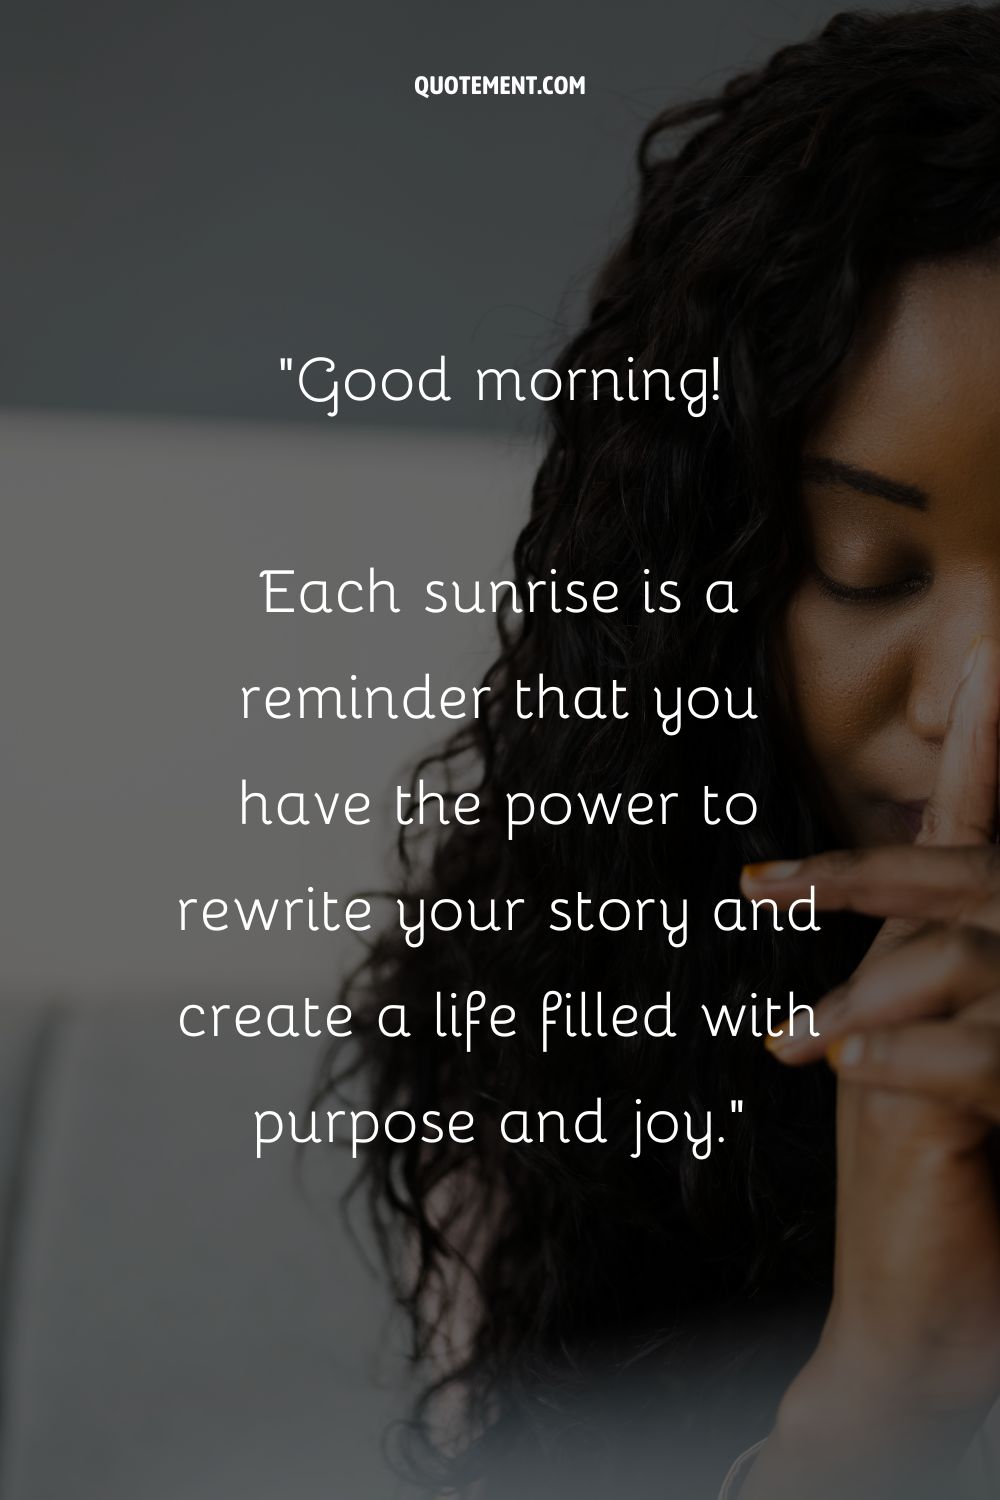 Good morning! Each sunrise is a reminder that you have the power to rewrite your story and create a life filled with purpose and joy.